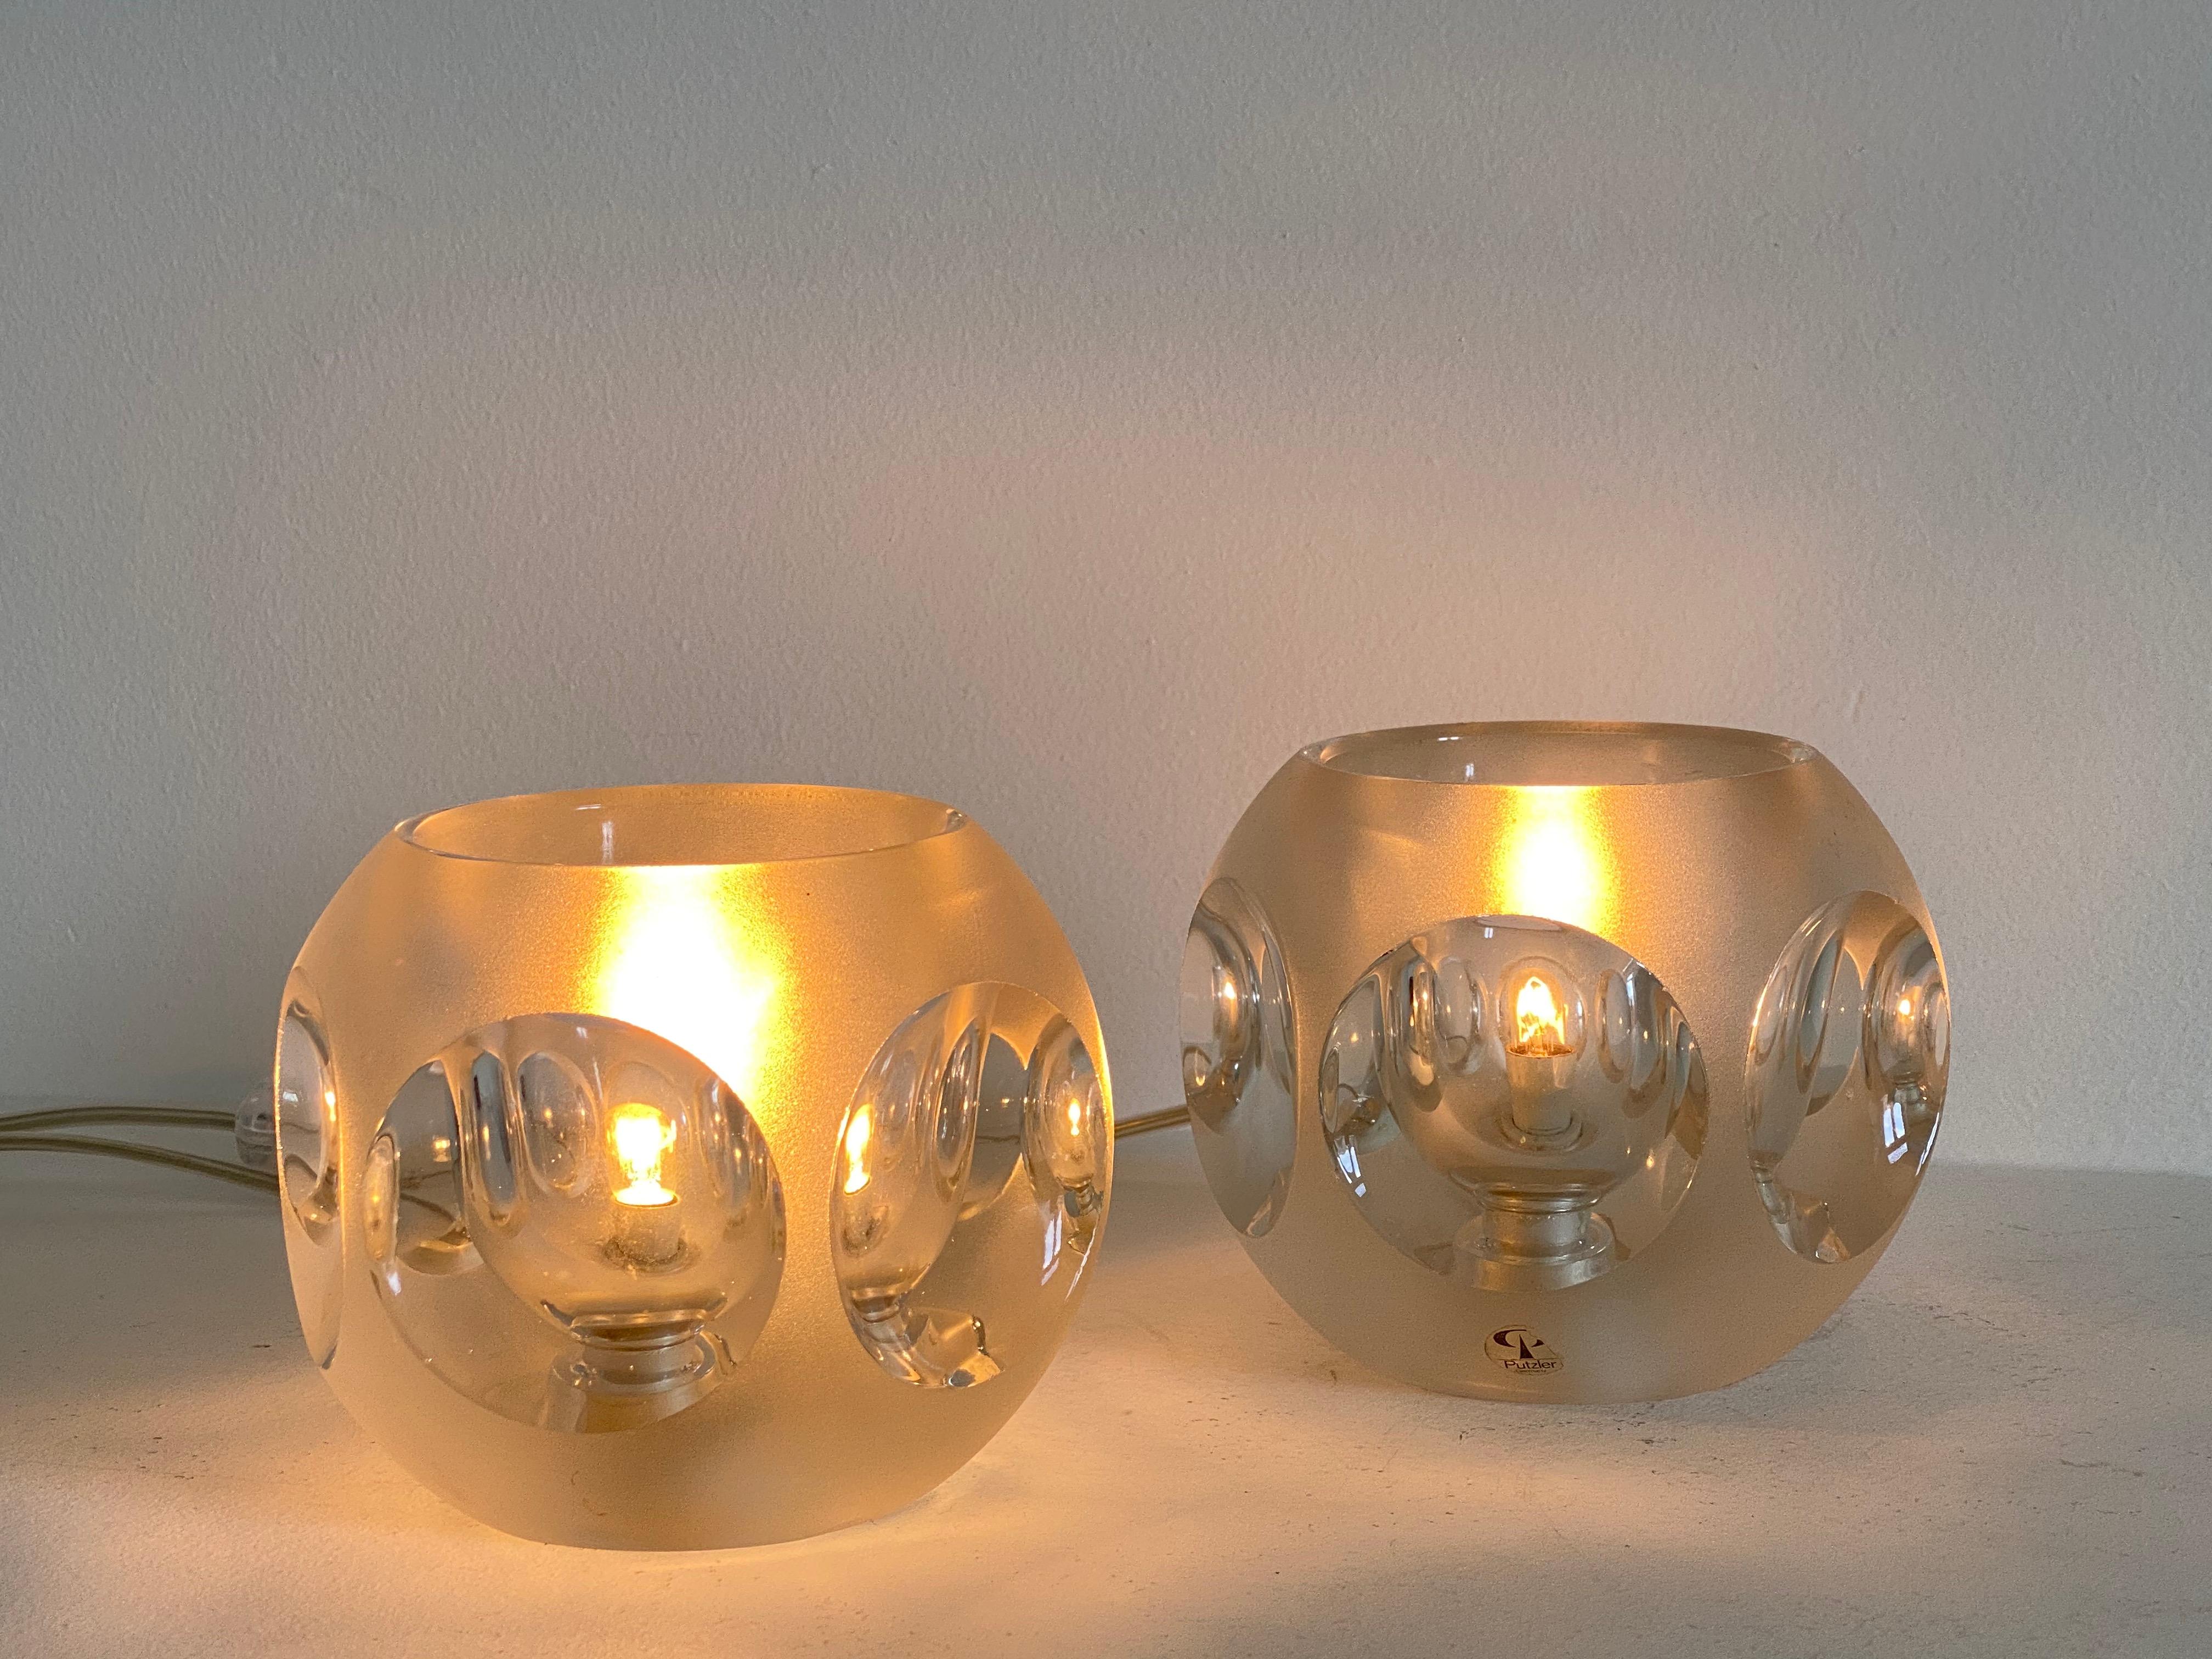 Set of 2 transparant ice glass cube table lamps by Peill & Puzzler, 1970
fully functional,
marked with original brand label.